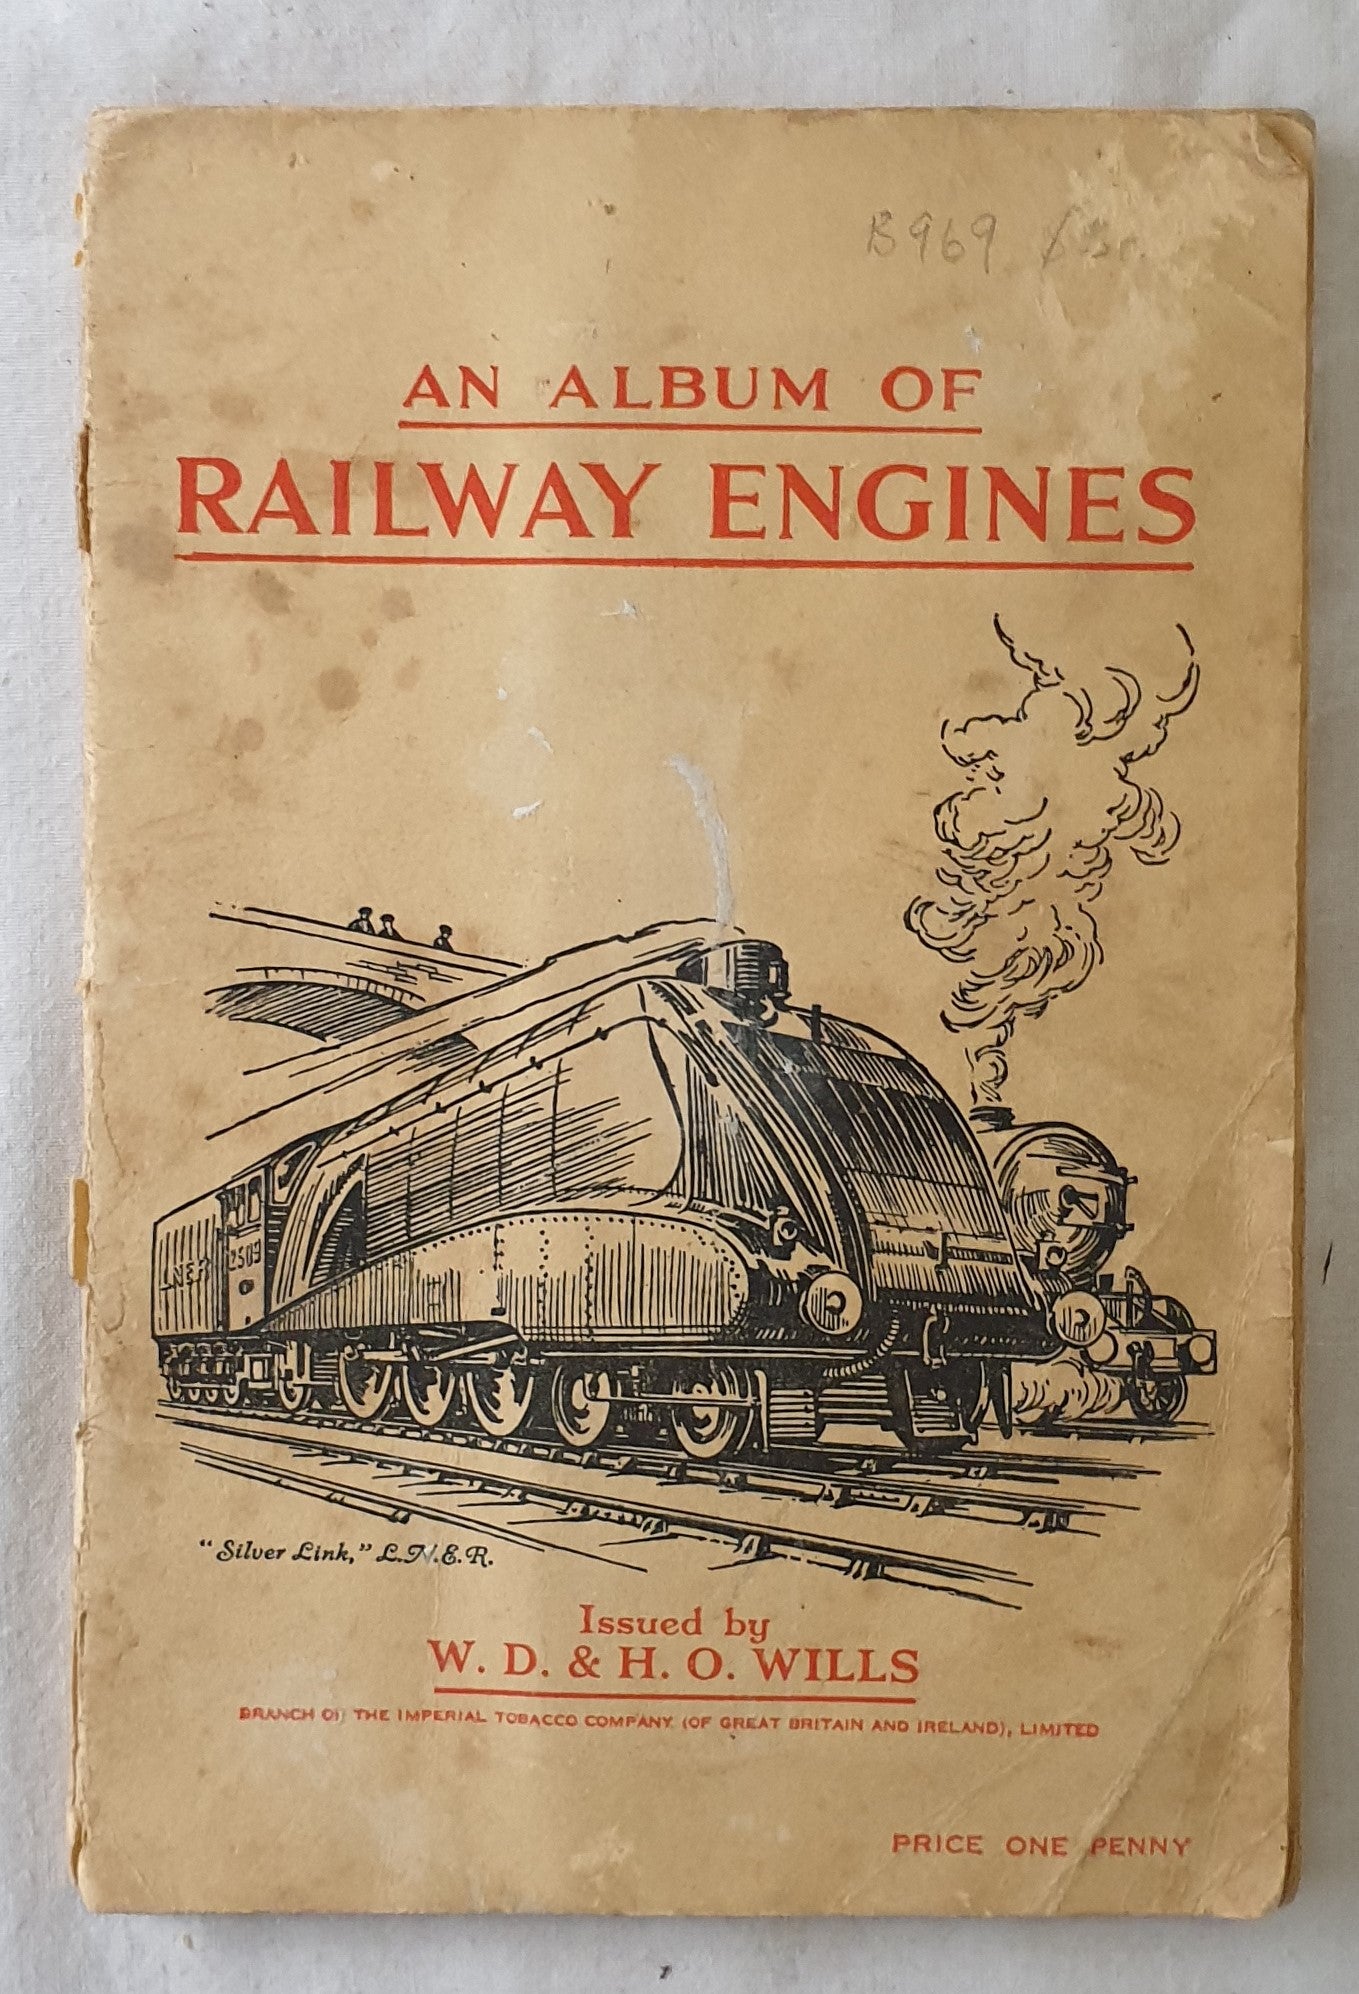 An Album of Railway Engines  Issued by W. D. & H. O. Wills